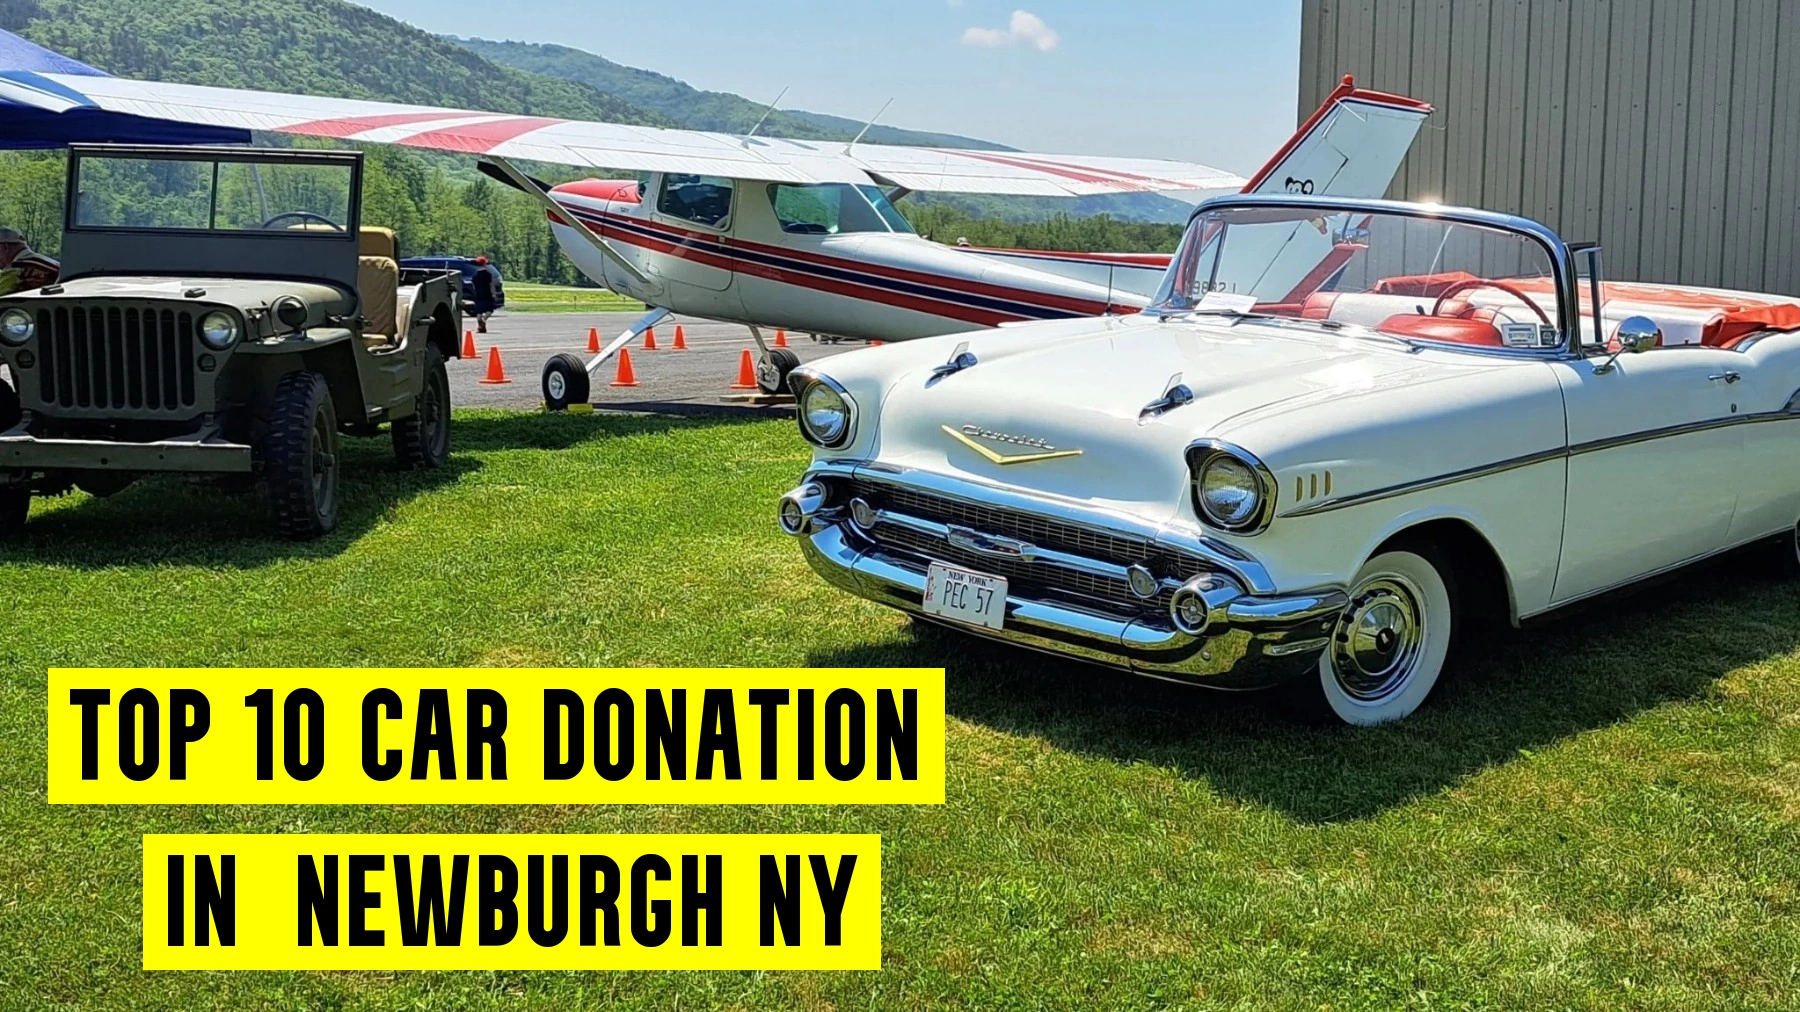 Top 10 Car Donation in Newburgh, NY